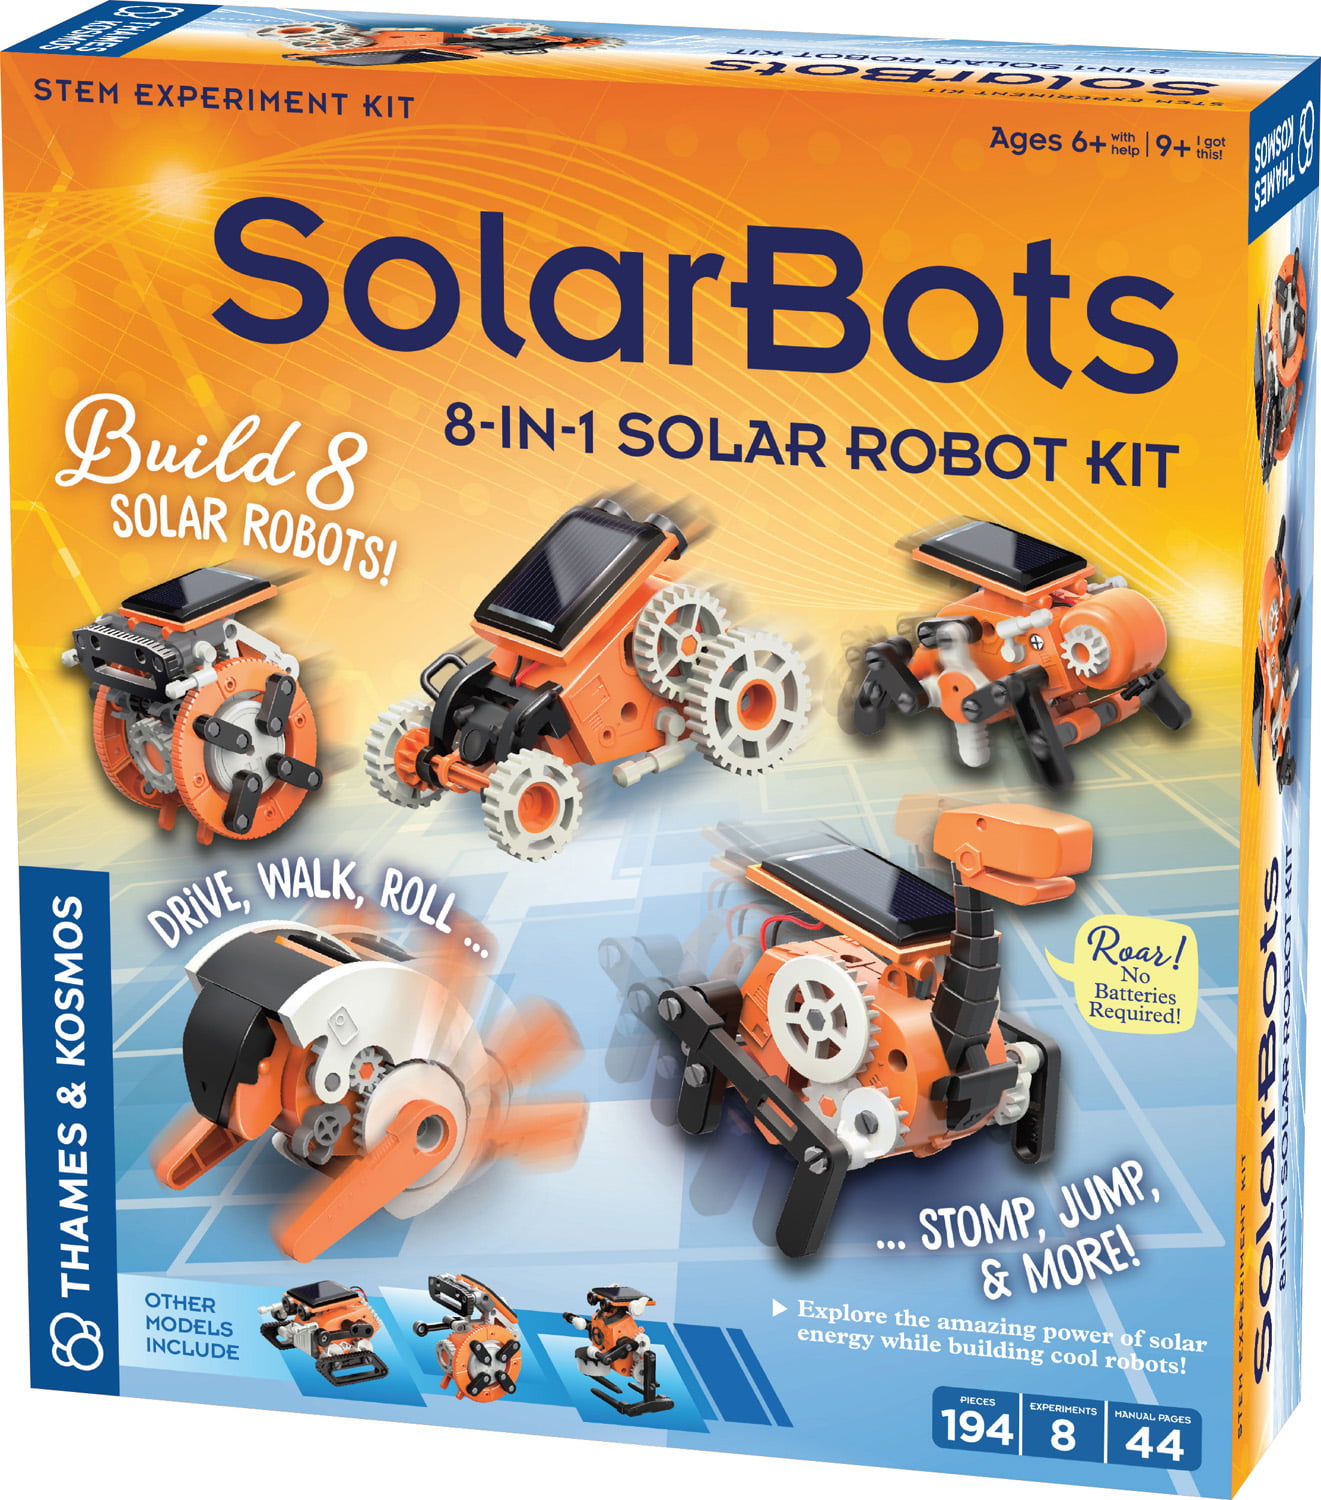 Handi blox The Fully Programmable Creative Educational STEM Coding Robot Ages 8 